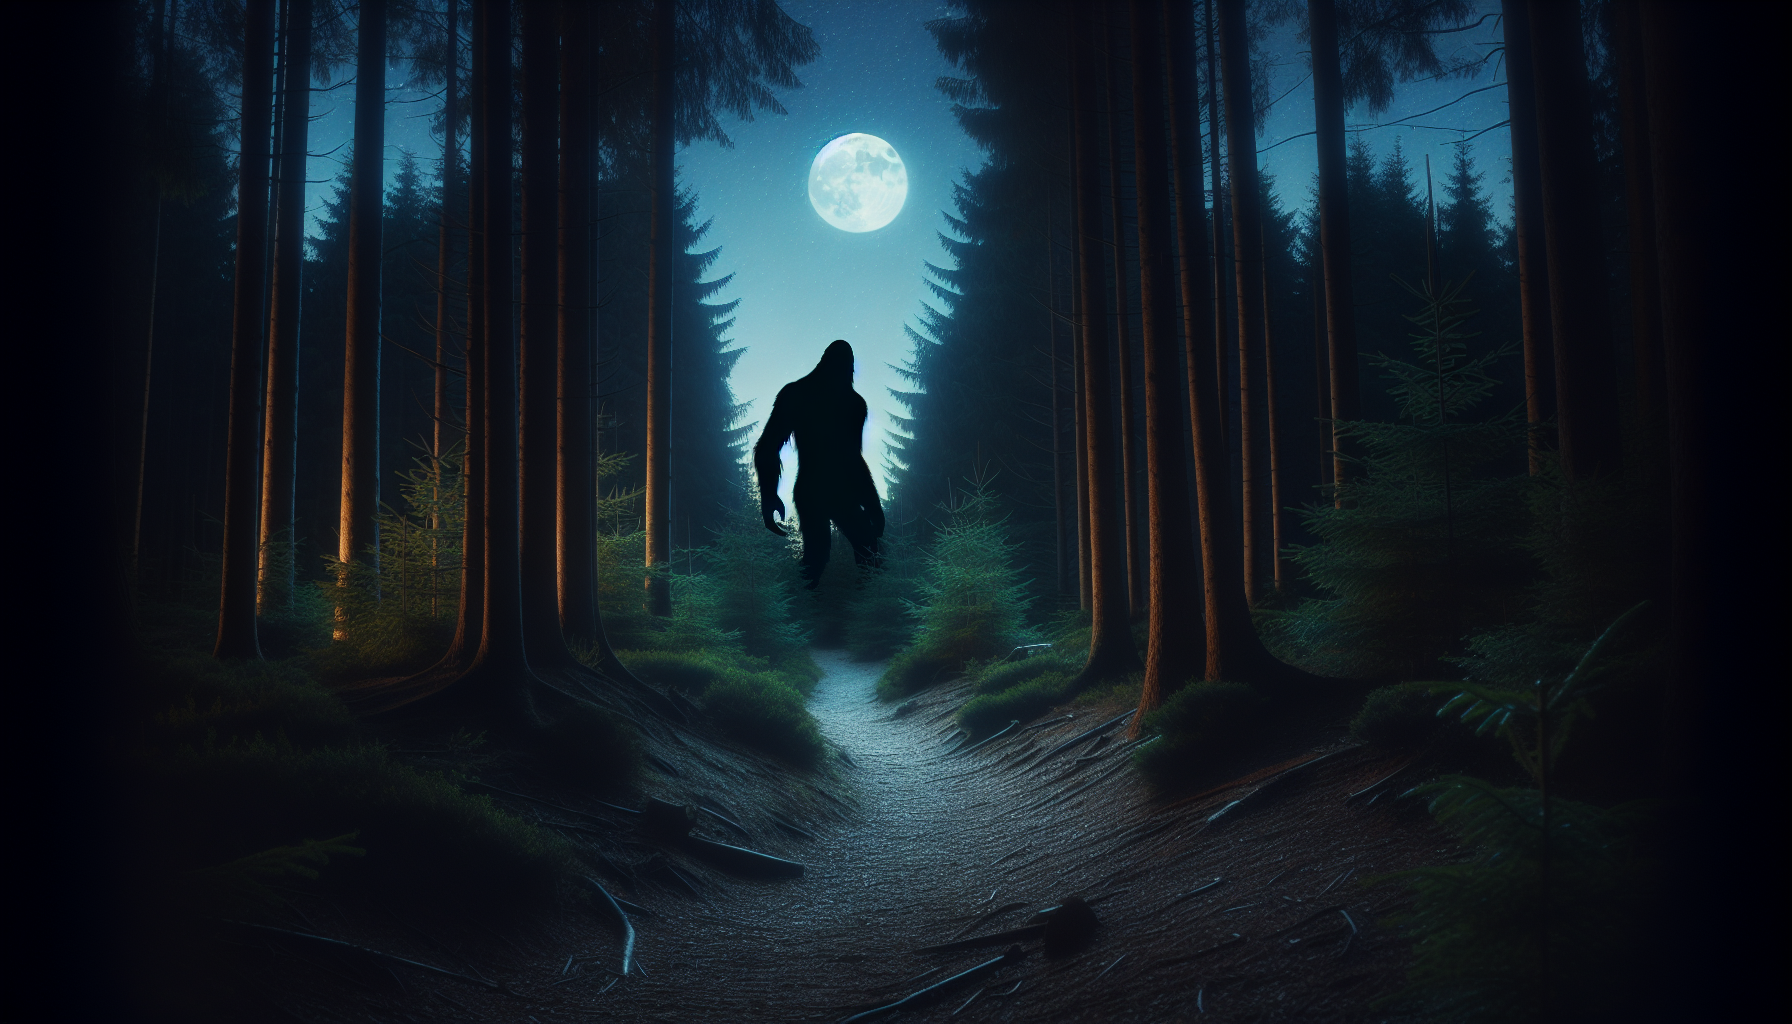 Wilderness encounter with a mysterious figure